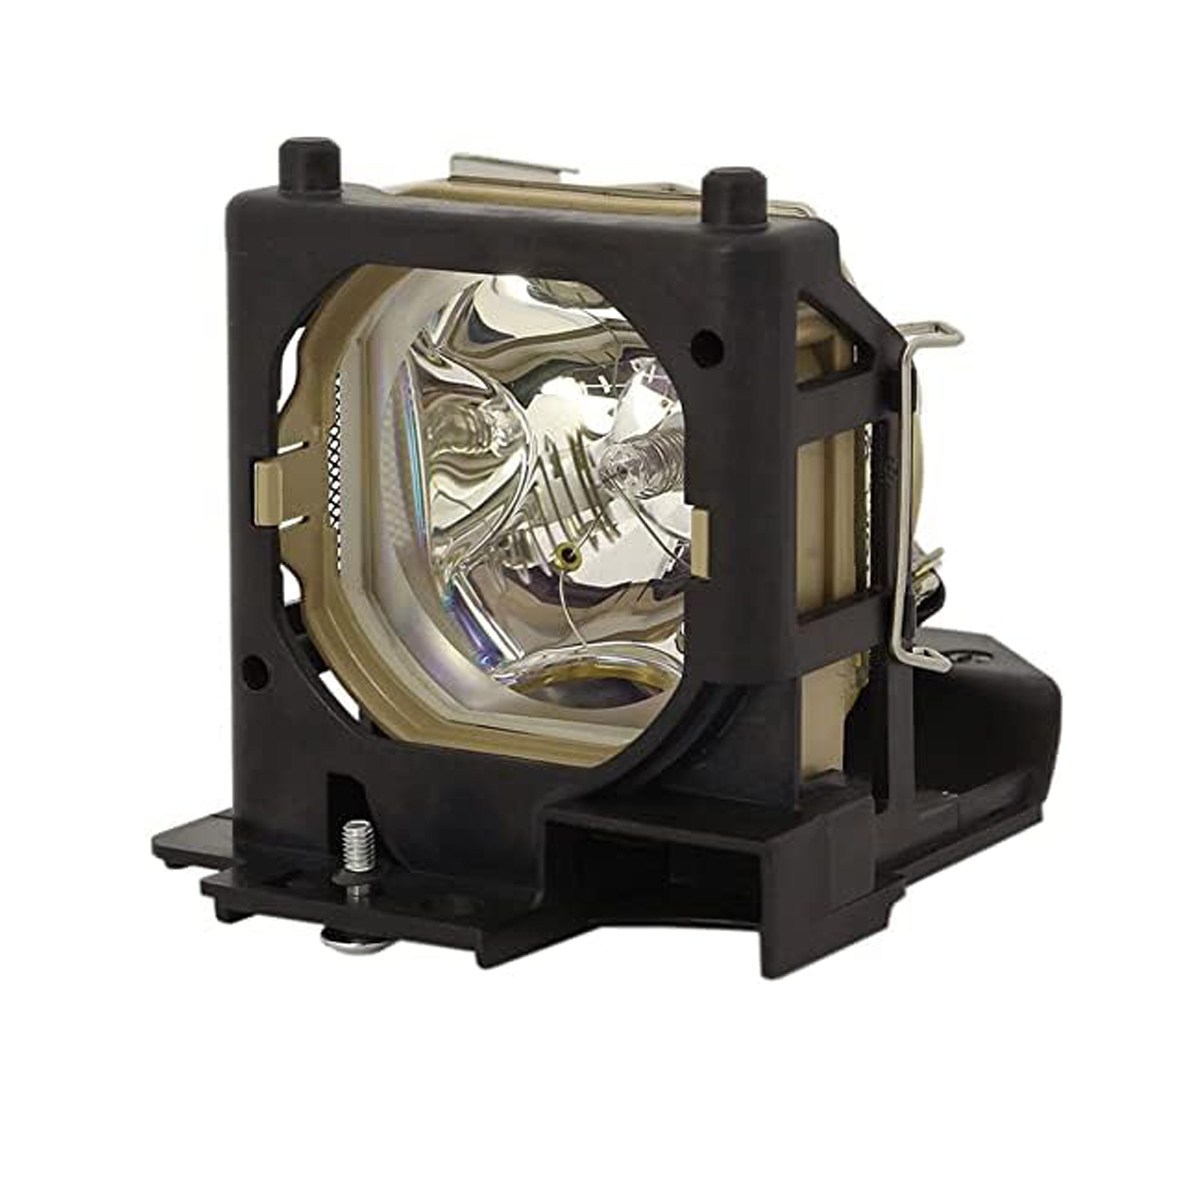 Replacement Projector lamp 456-8063 For Dukane Projector